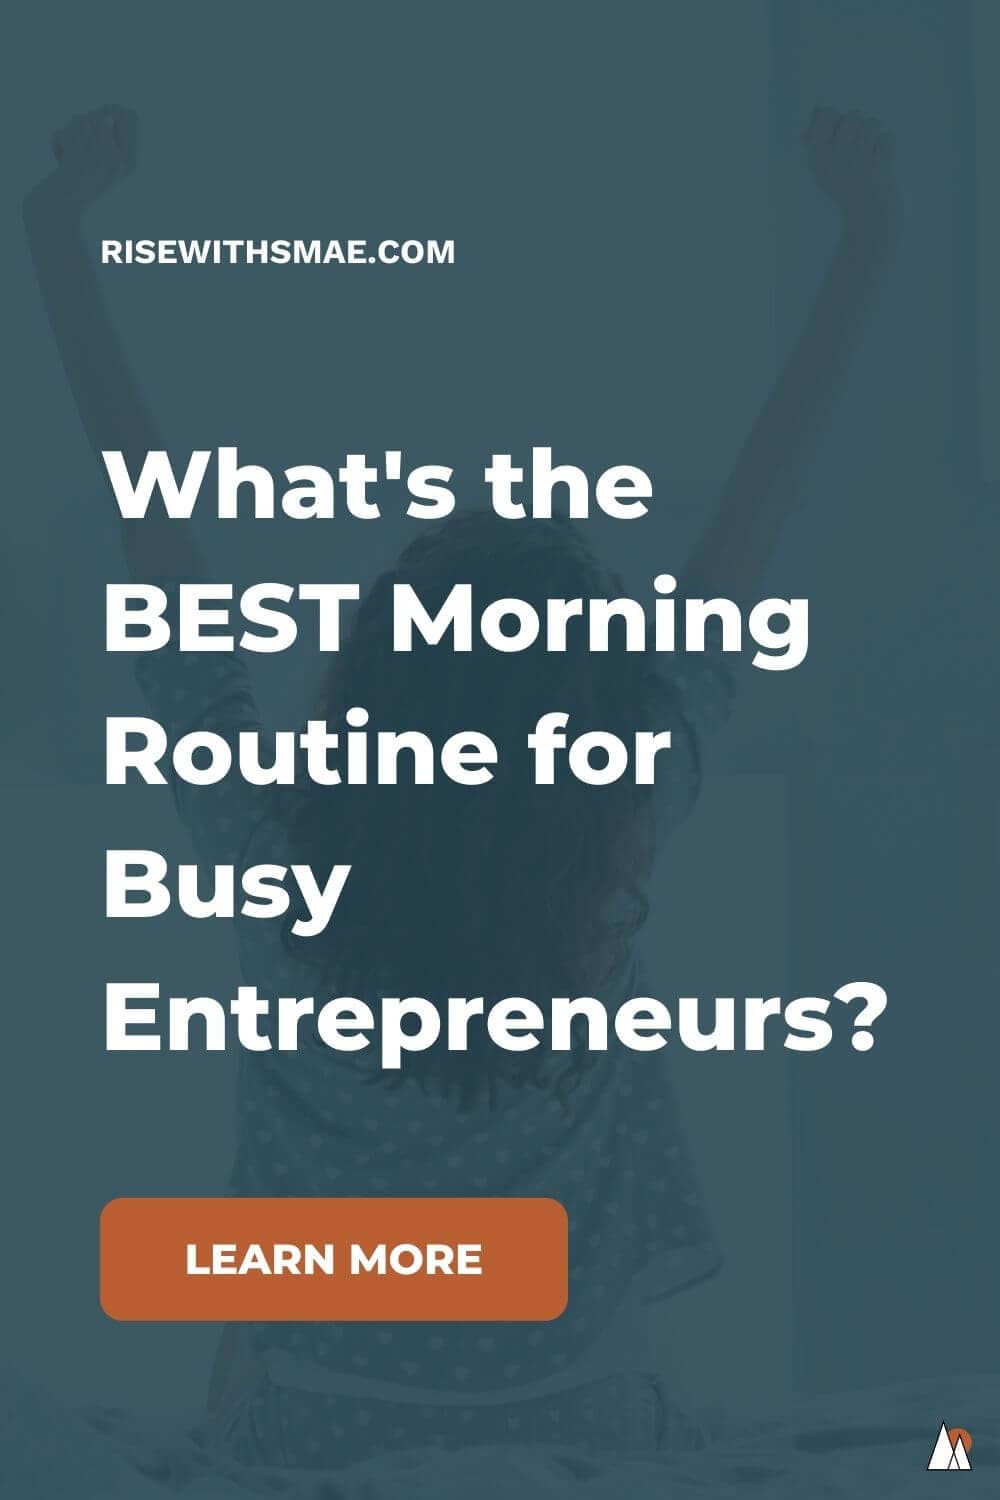 What is the Best Morning Routine for Busy Entrepreneurs?